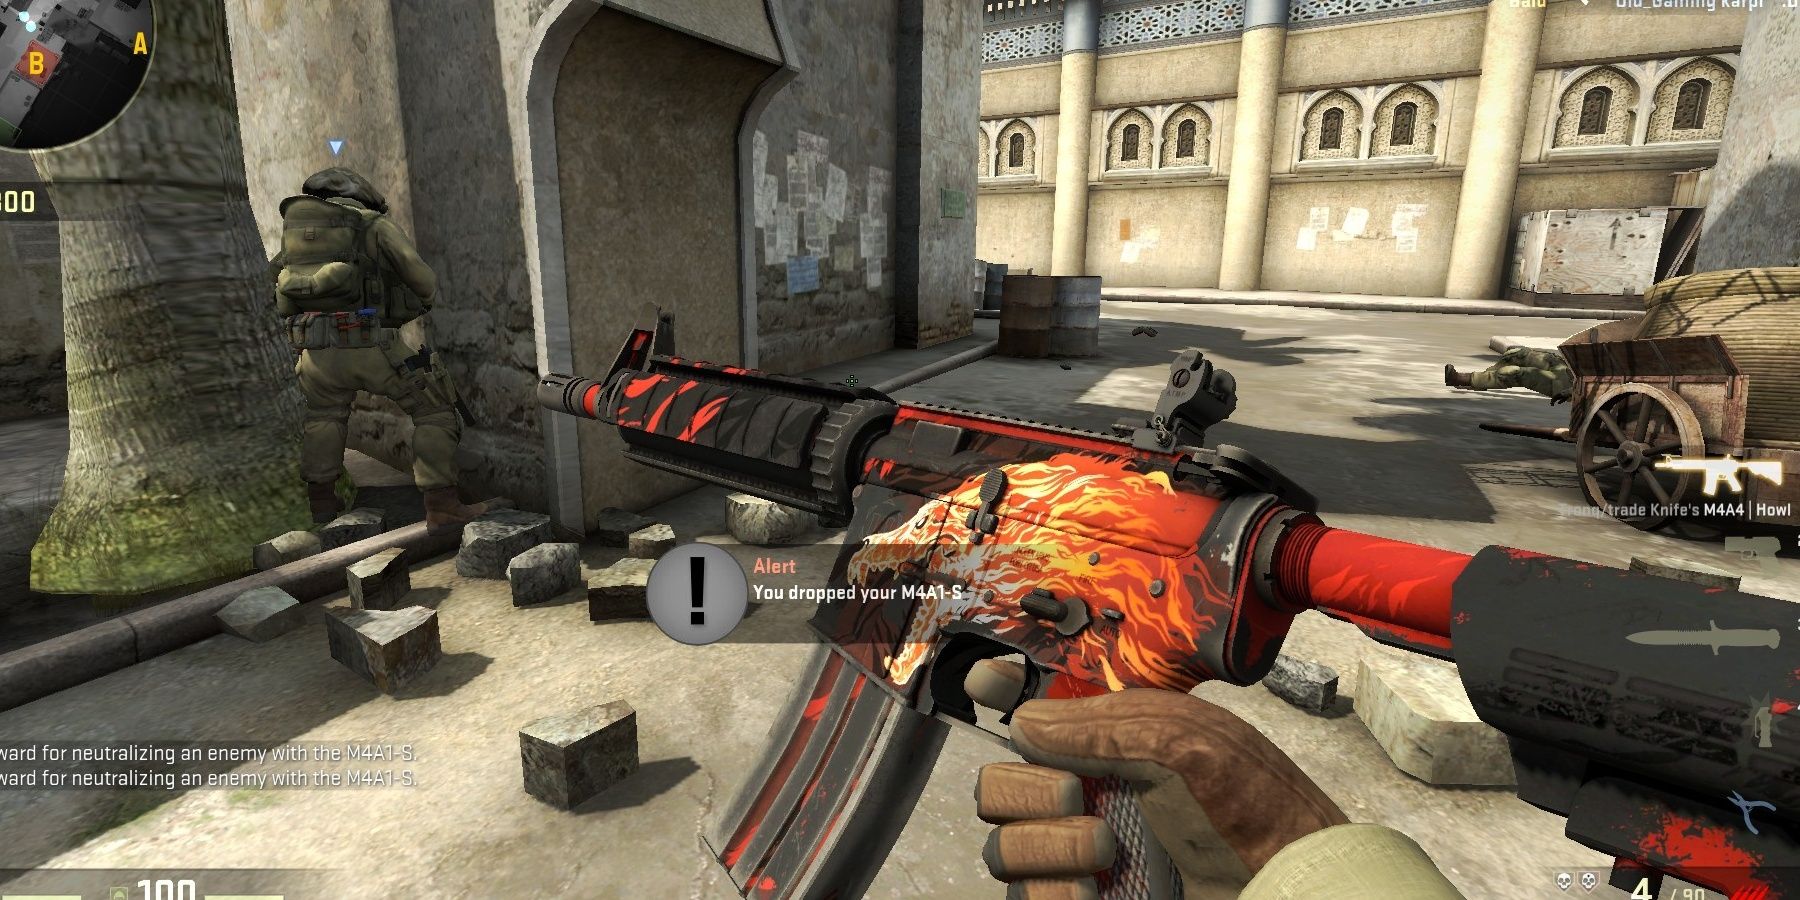 The M4A4 in Counter-Strike: Global Offensive